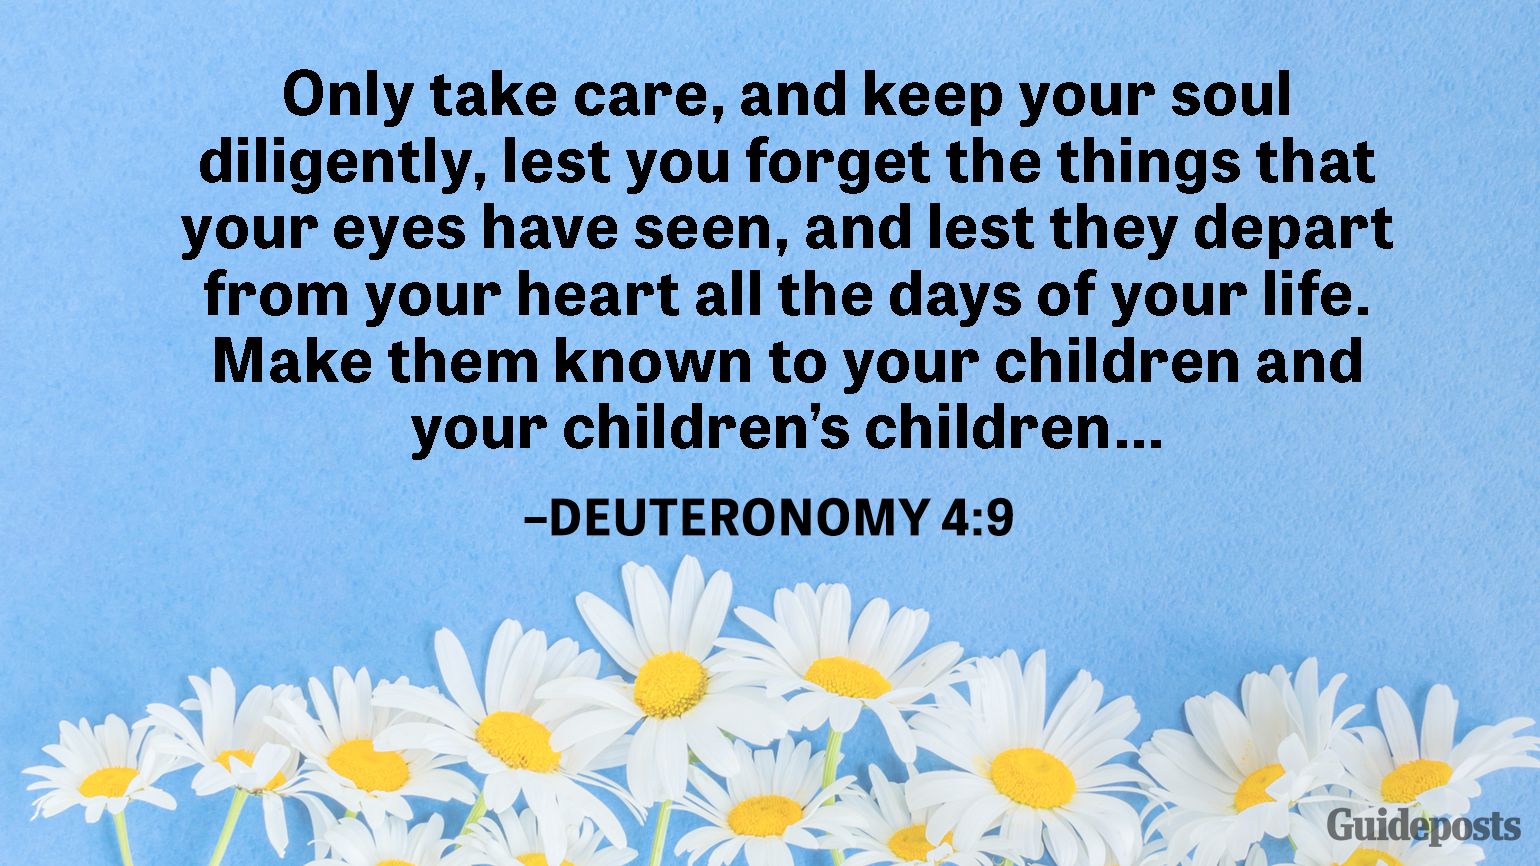 Only take care, and keep your soul diligently, lest you forget the things that your eyes have seen, and lest they depart from your heart all the days of your life. Make them known to your children and your children’s children…  –Deuteronomy 4:9